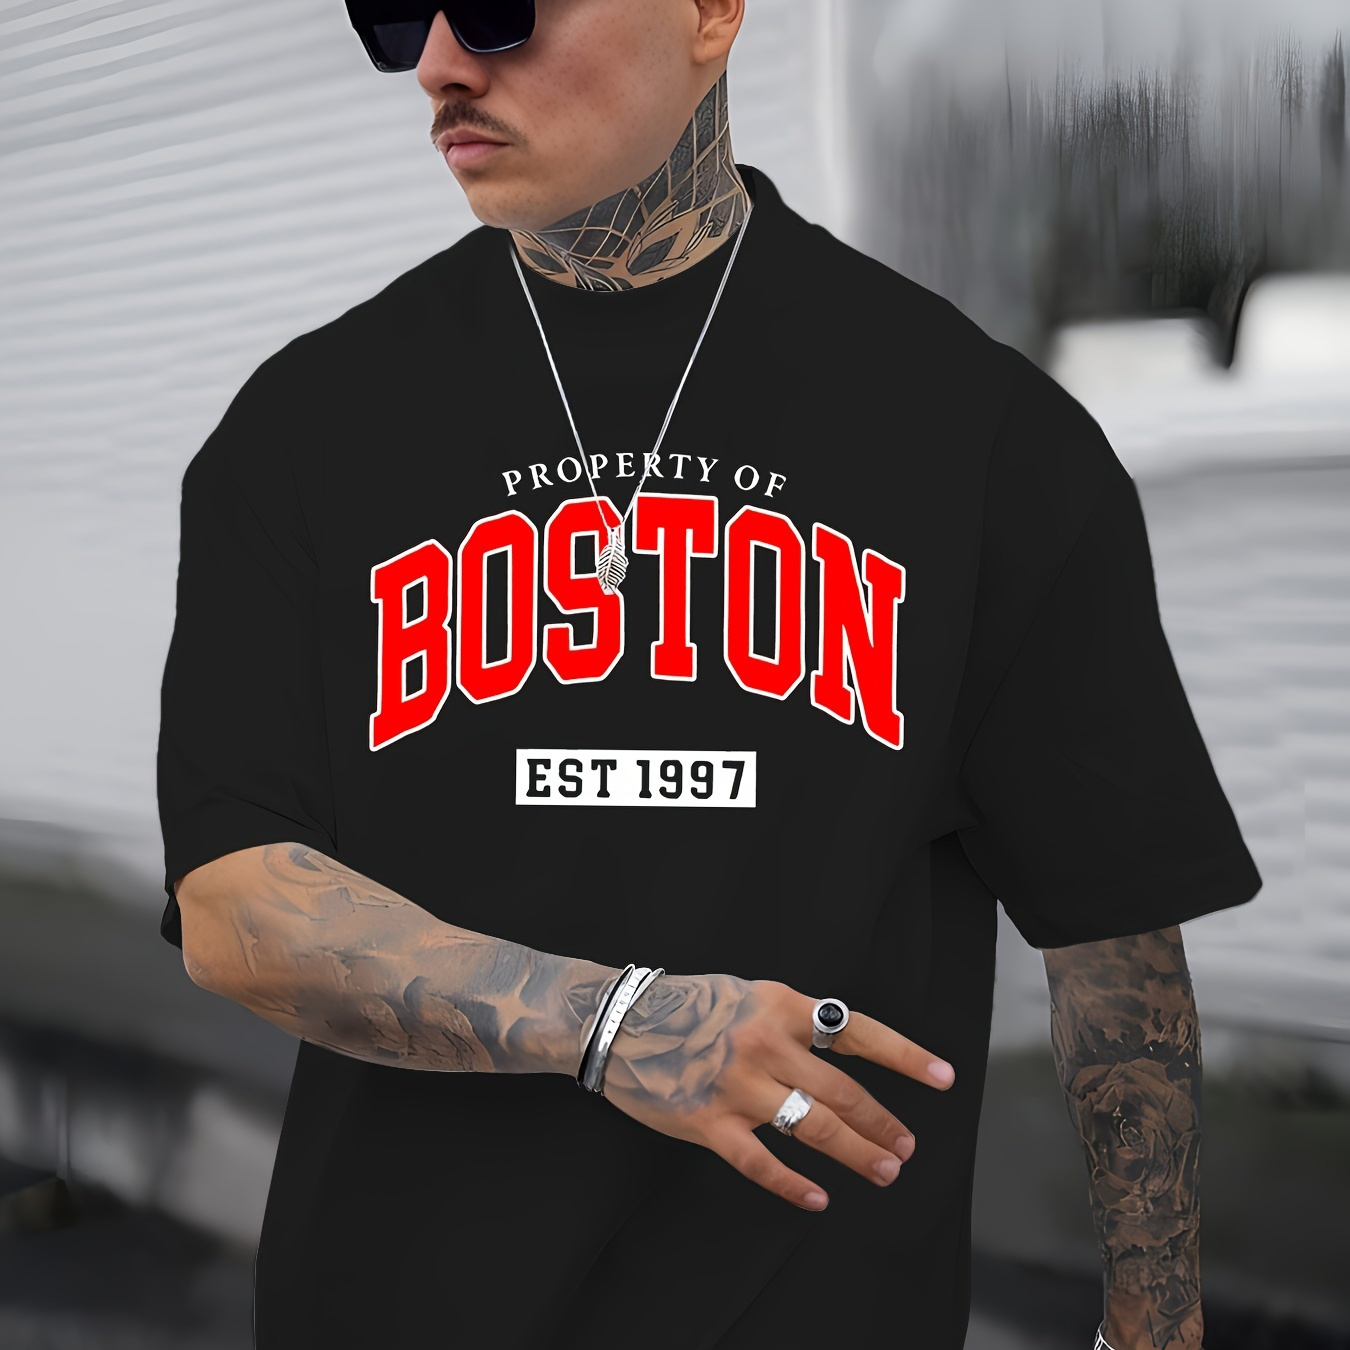 

Men's Casual Short-sleeve T-shirt With " Boston Est 1997 " Vibrant Letter Print, Comfortable Top For Spring And Summer, Crew Neck Tee, Relaxed Fit